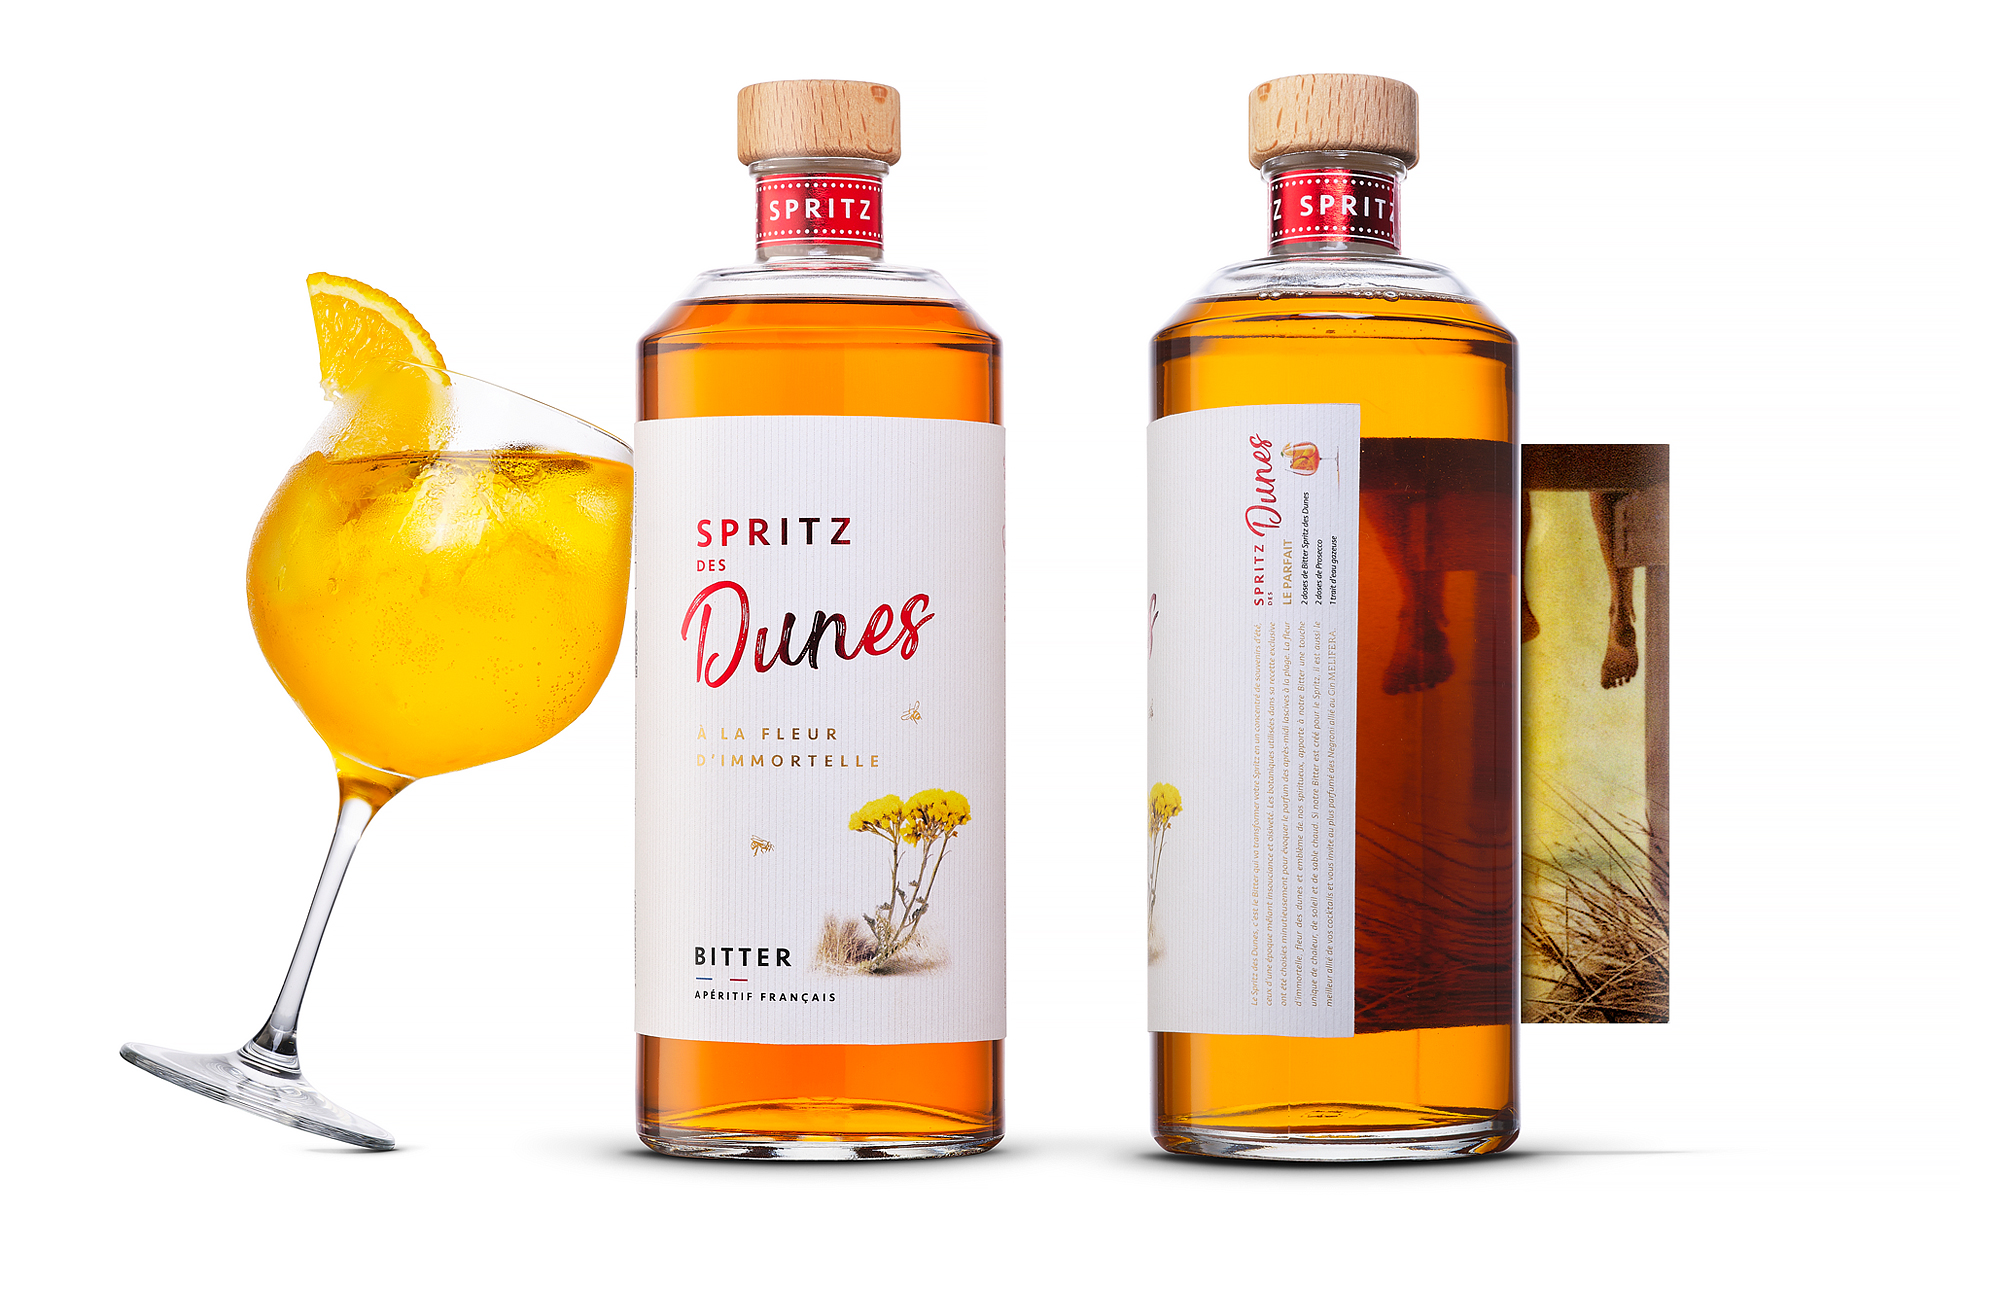 French-Inspired Oceanic Spritz: A Nostalgic Aperitif with a Twist